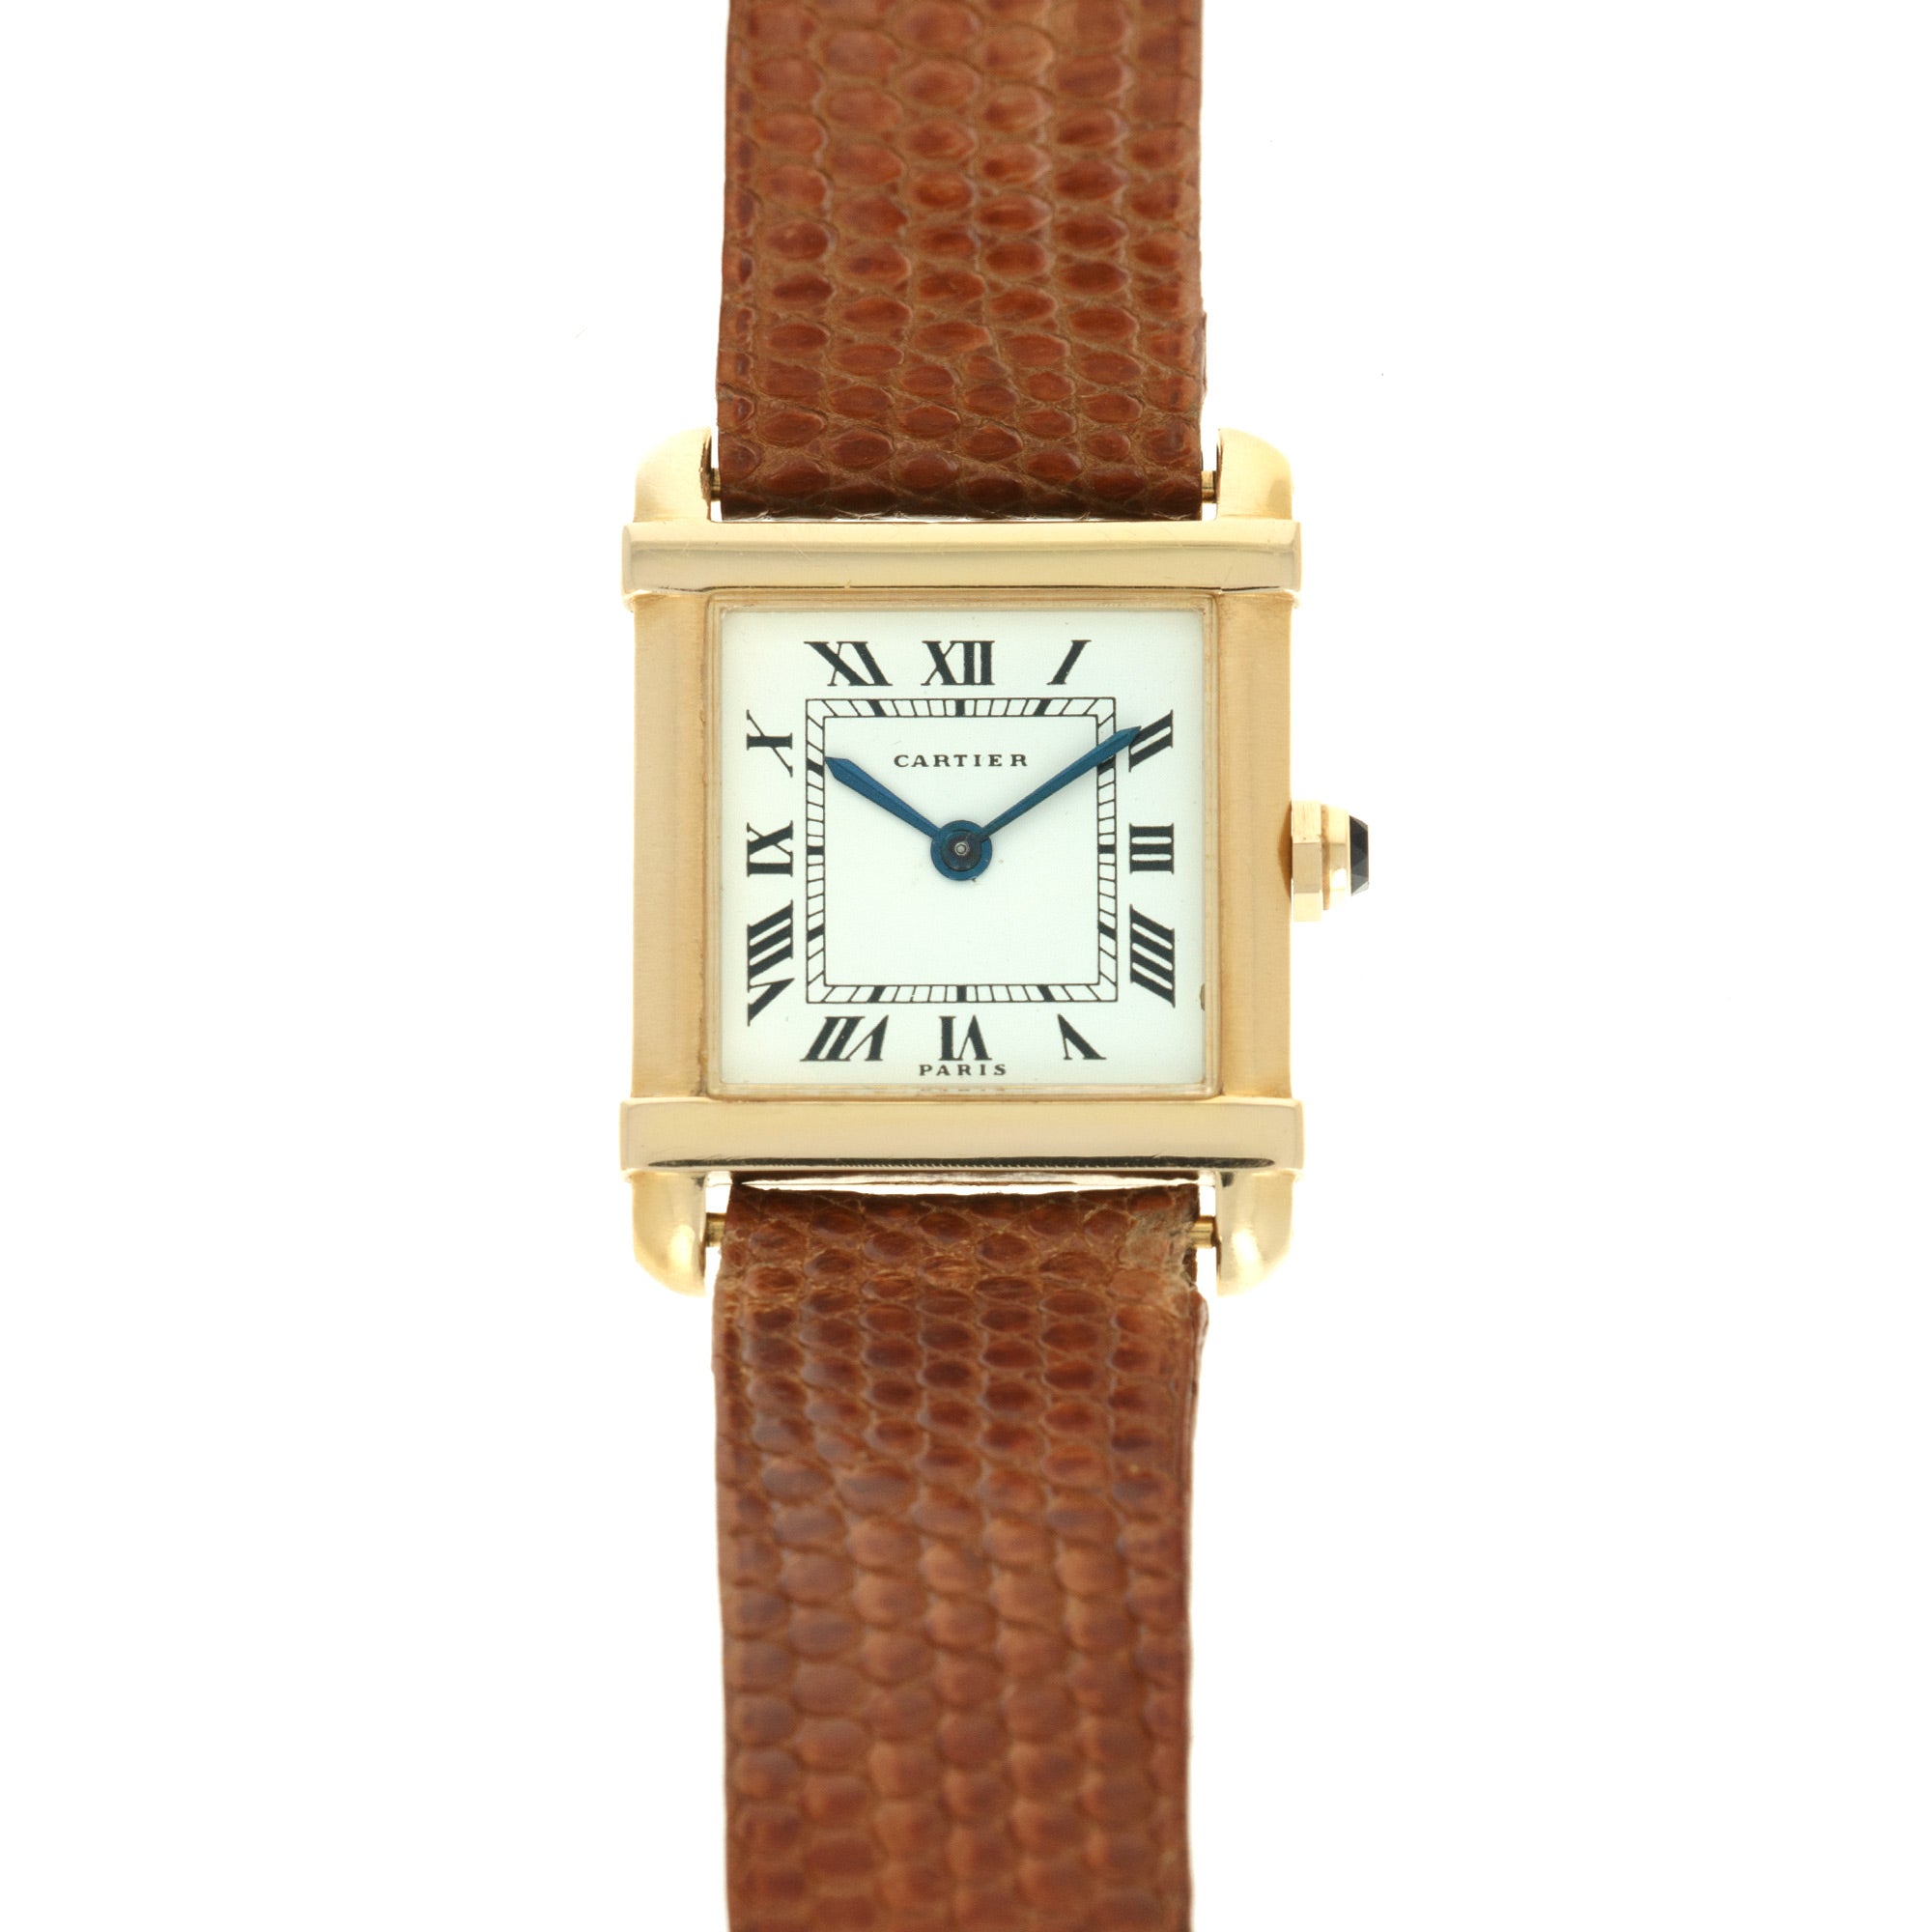 Cartier - Cartier Yellow Gold Tank Chinoise Watch, 1970s - The Keystone Watches